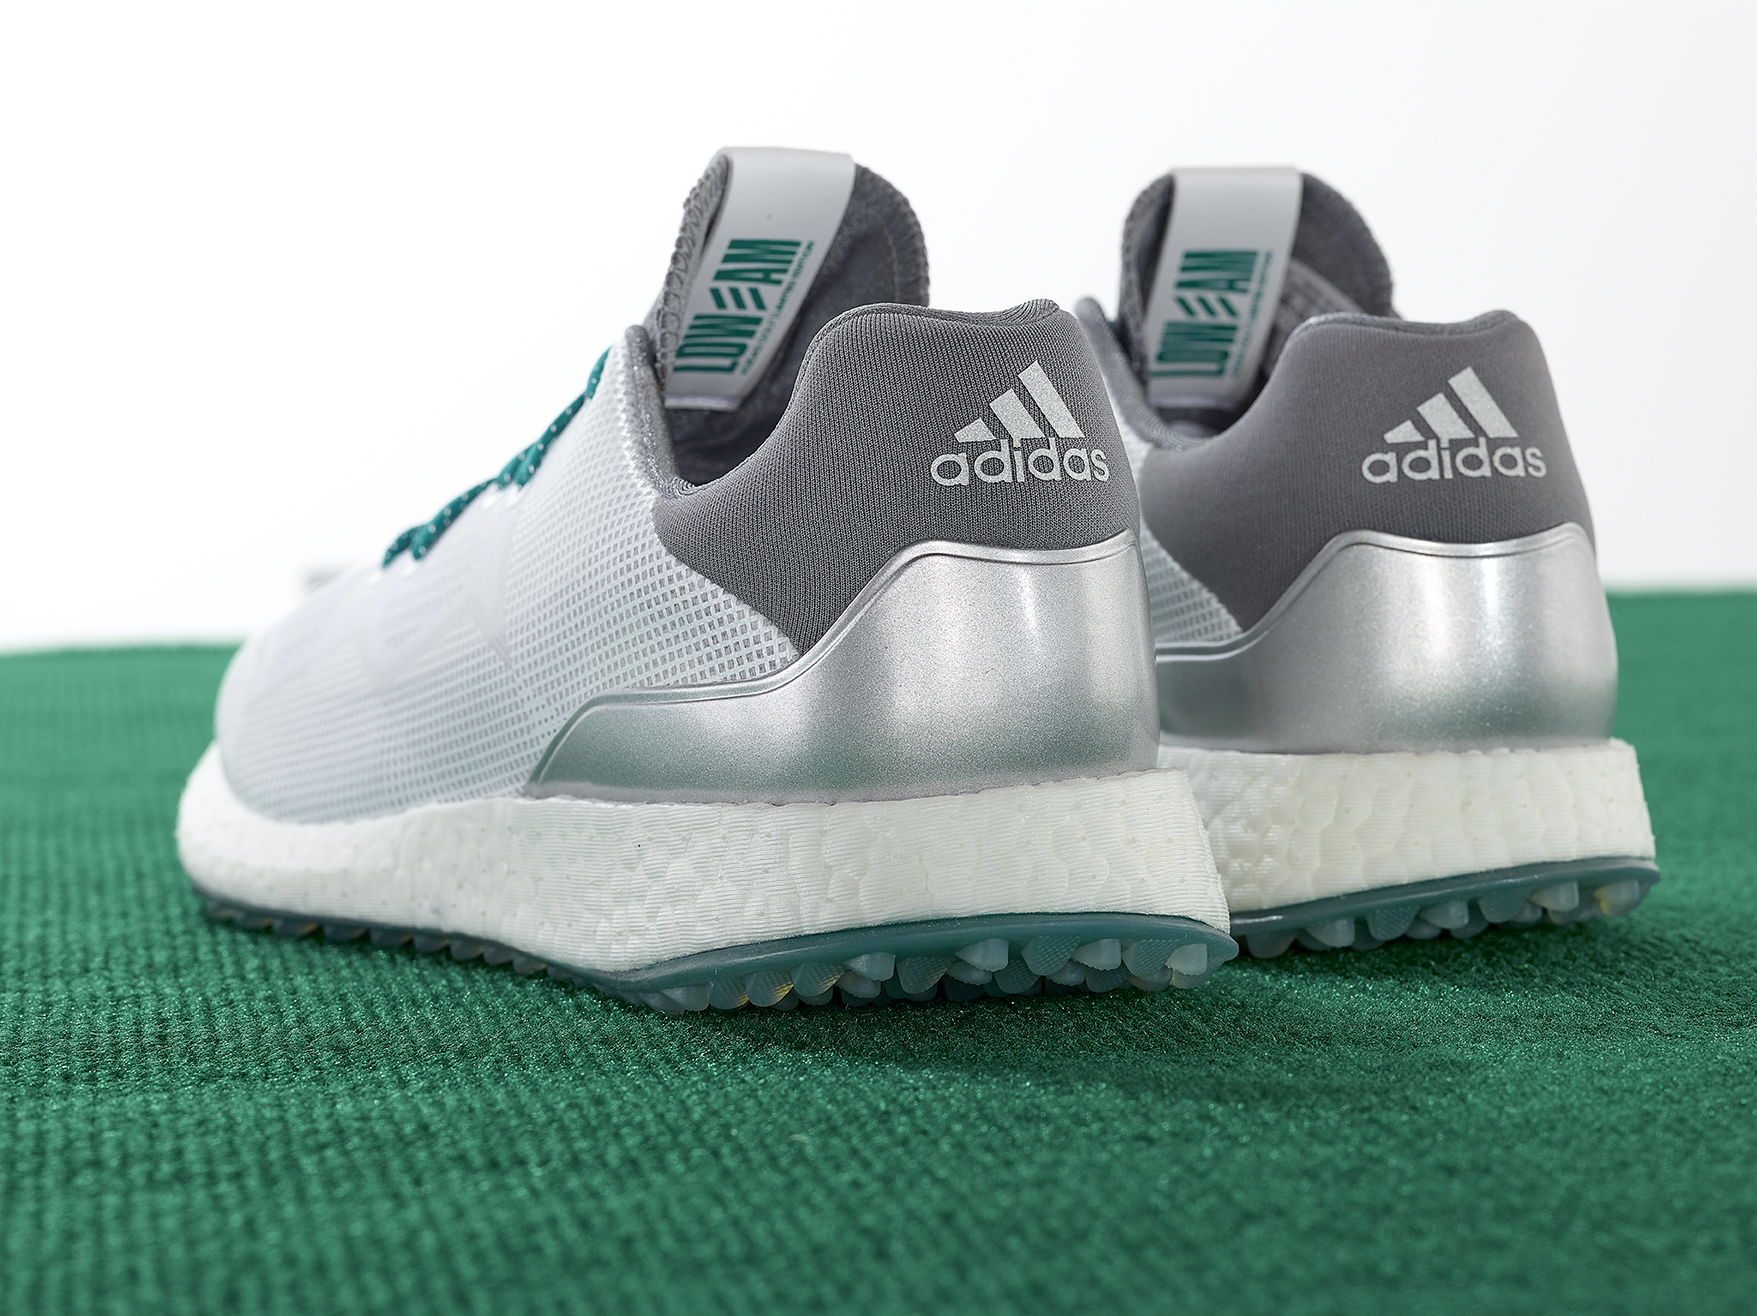 new adidas golf shoes 2020